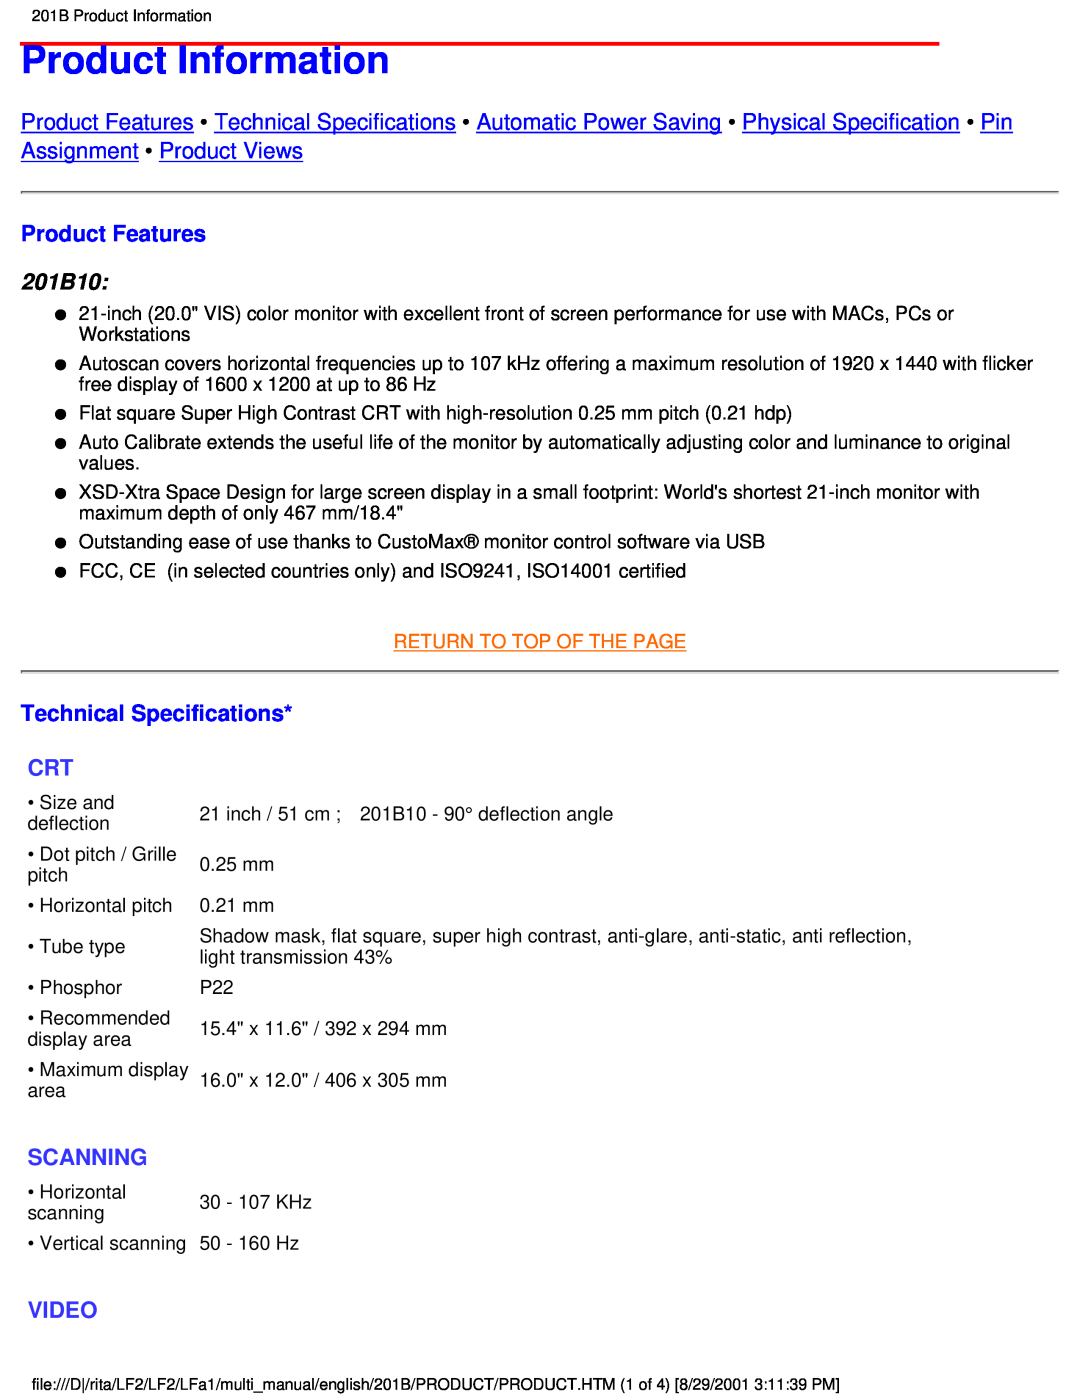 Philips user manual Product Information, Product Features, 201B10, Technical Specifications, Scanning, Video 